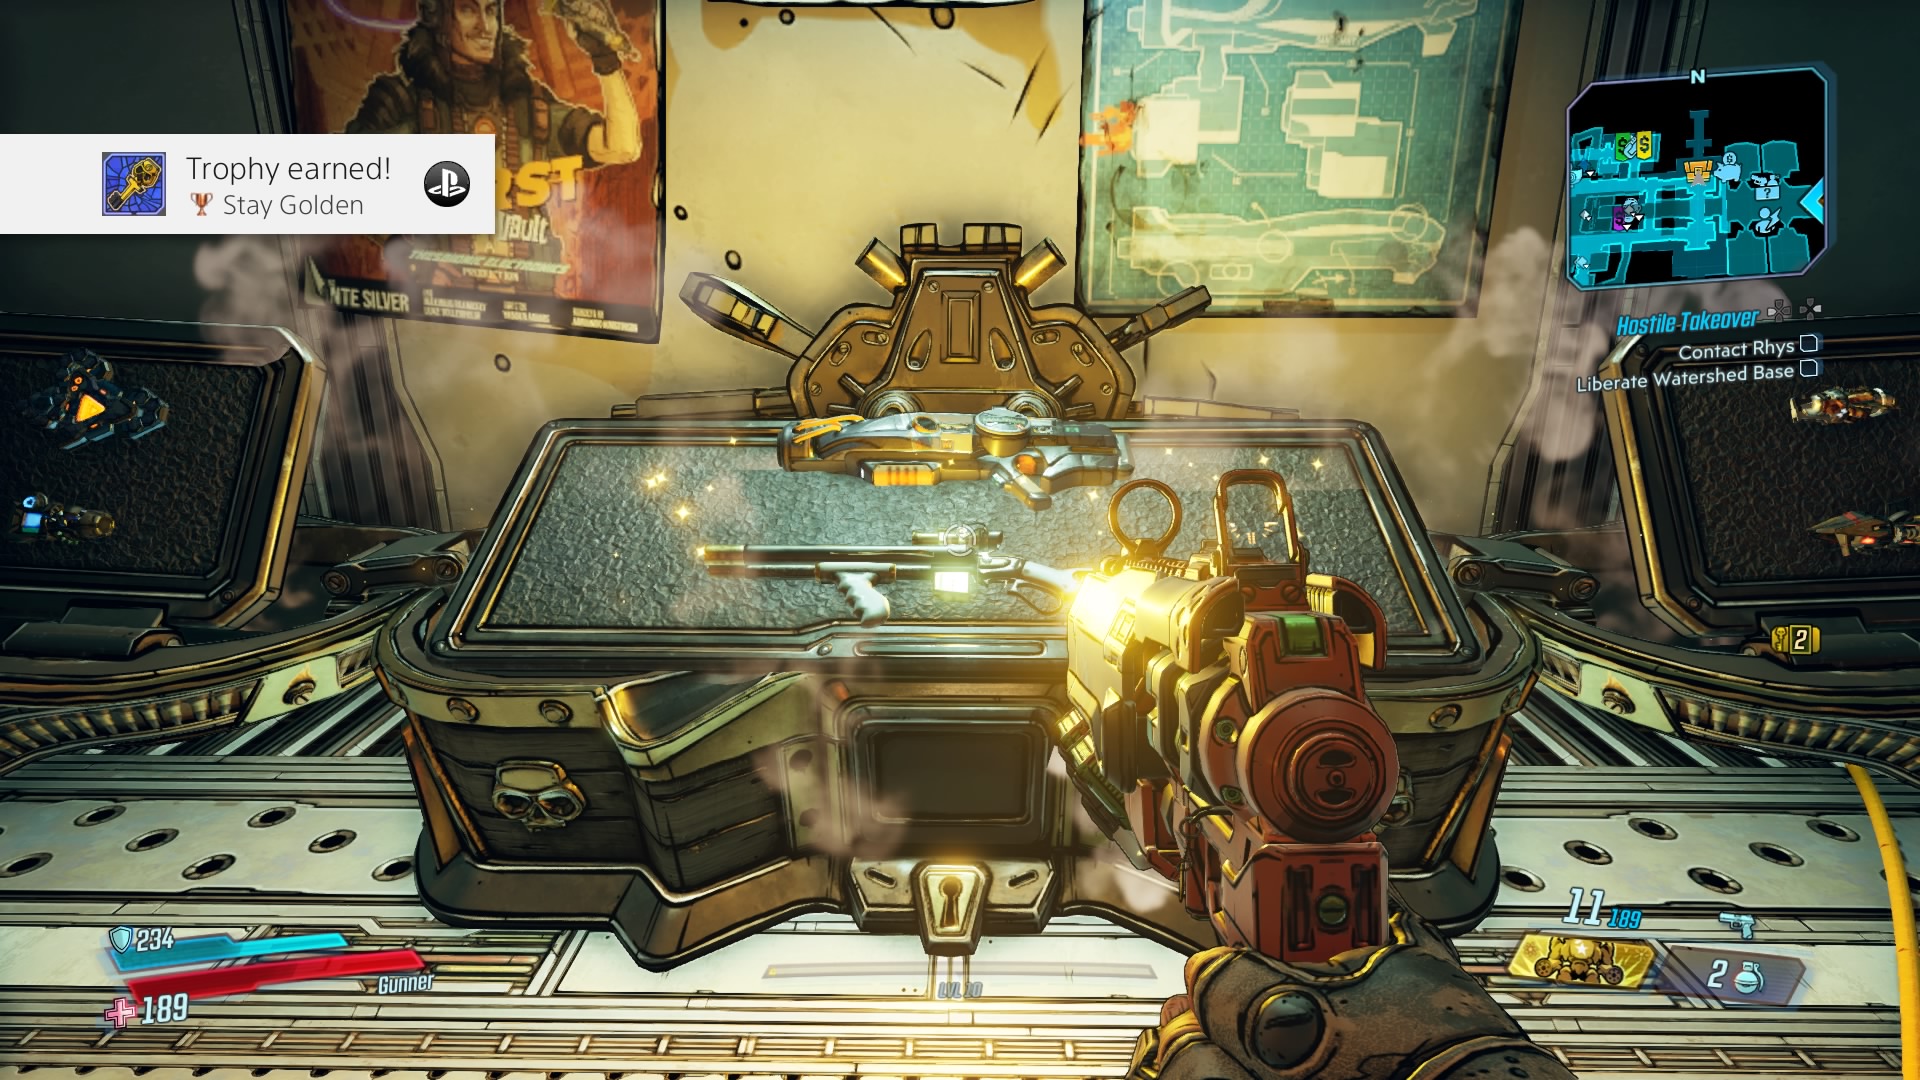 Every Borderlands 3 Shift Code you need to unlock the Golden Chest on